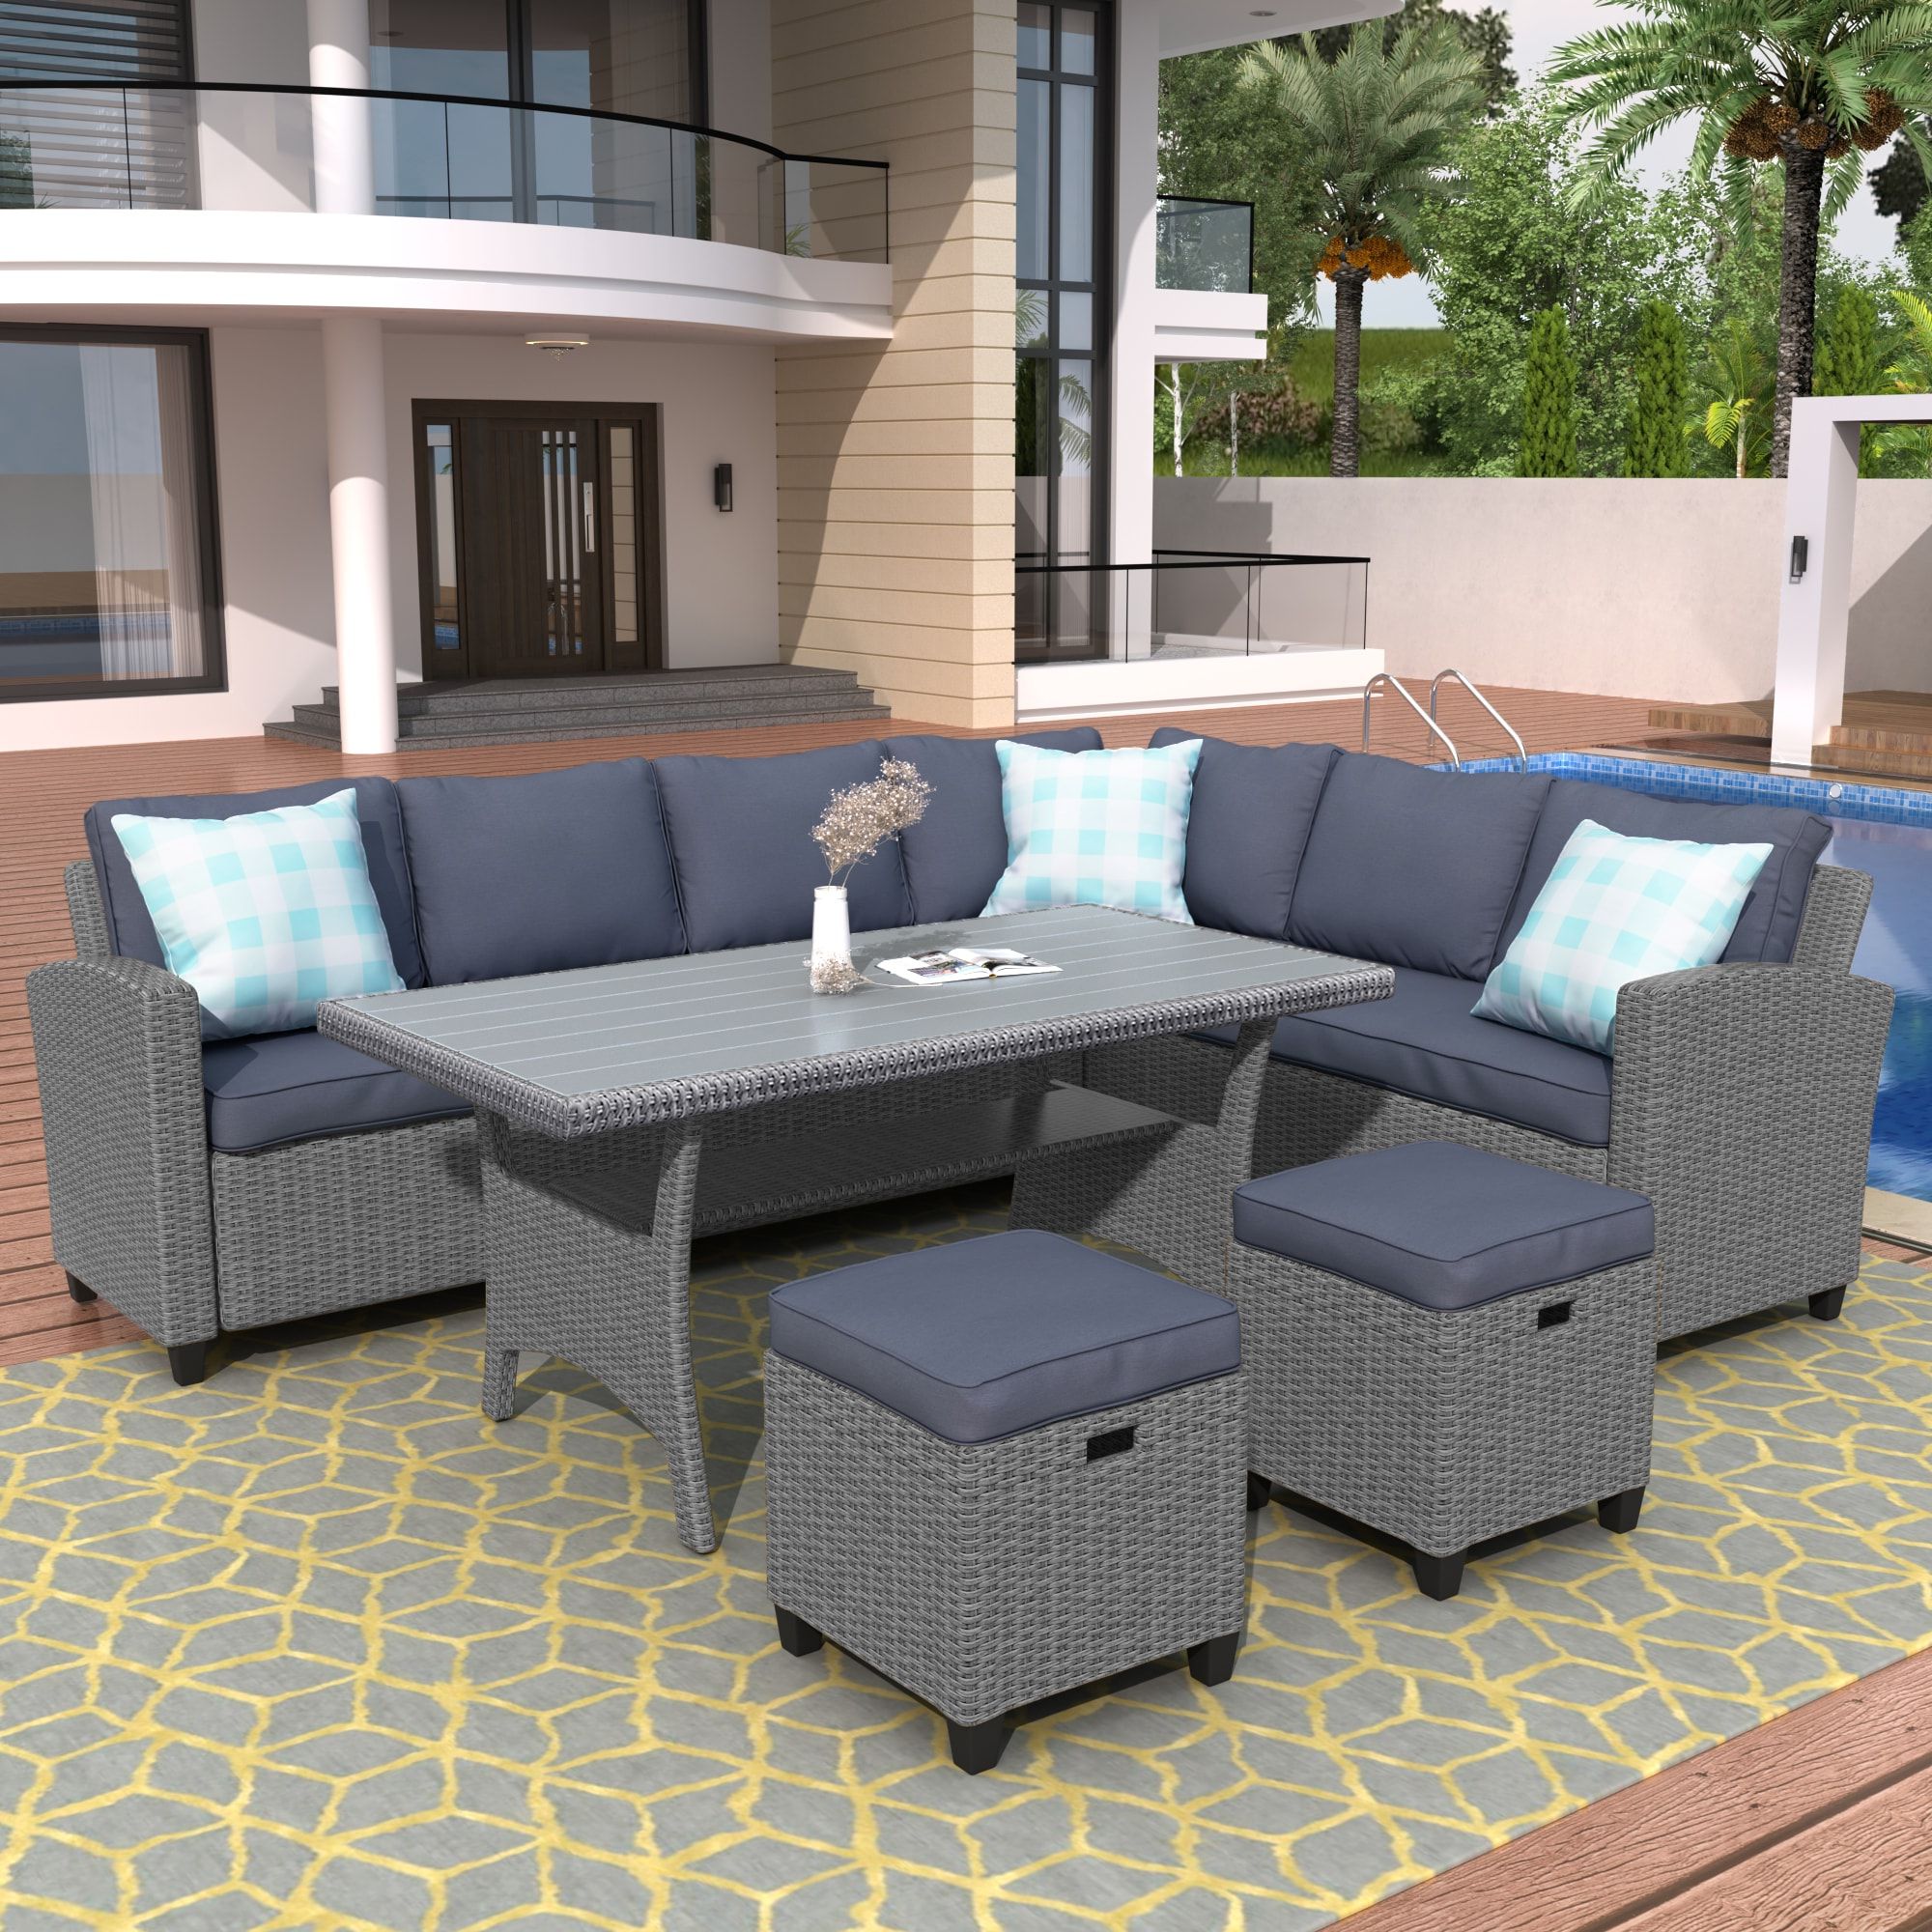 Trendy Wellfor Uc Wicker Outdoor Furniture 5 Piece Wicker Patio Conversation Set  With Gray Cushions In The Patio Conversation Sets Department At Lowes For 5 Piece Patio Conversation Set (View 8 of 16)